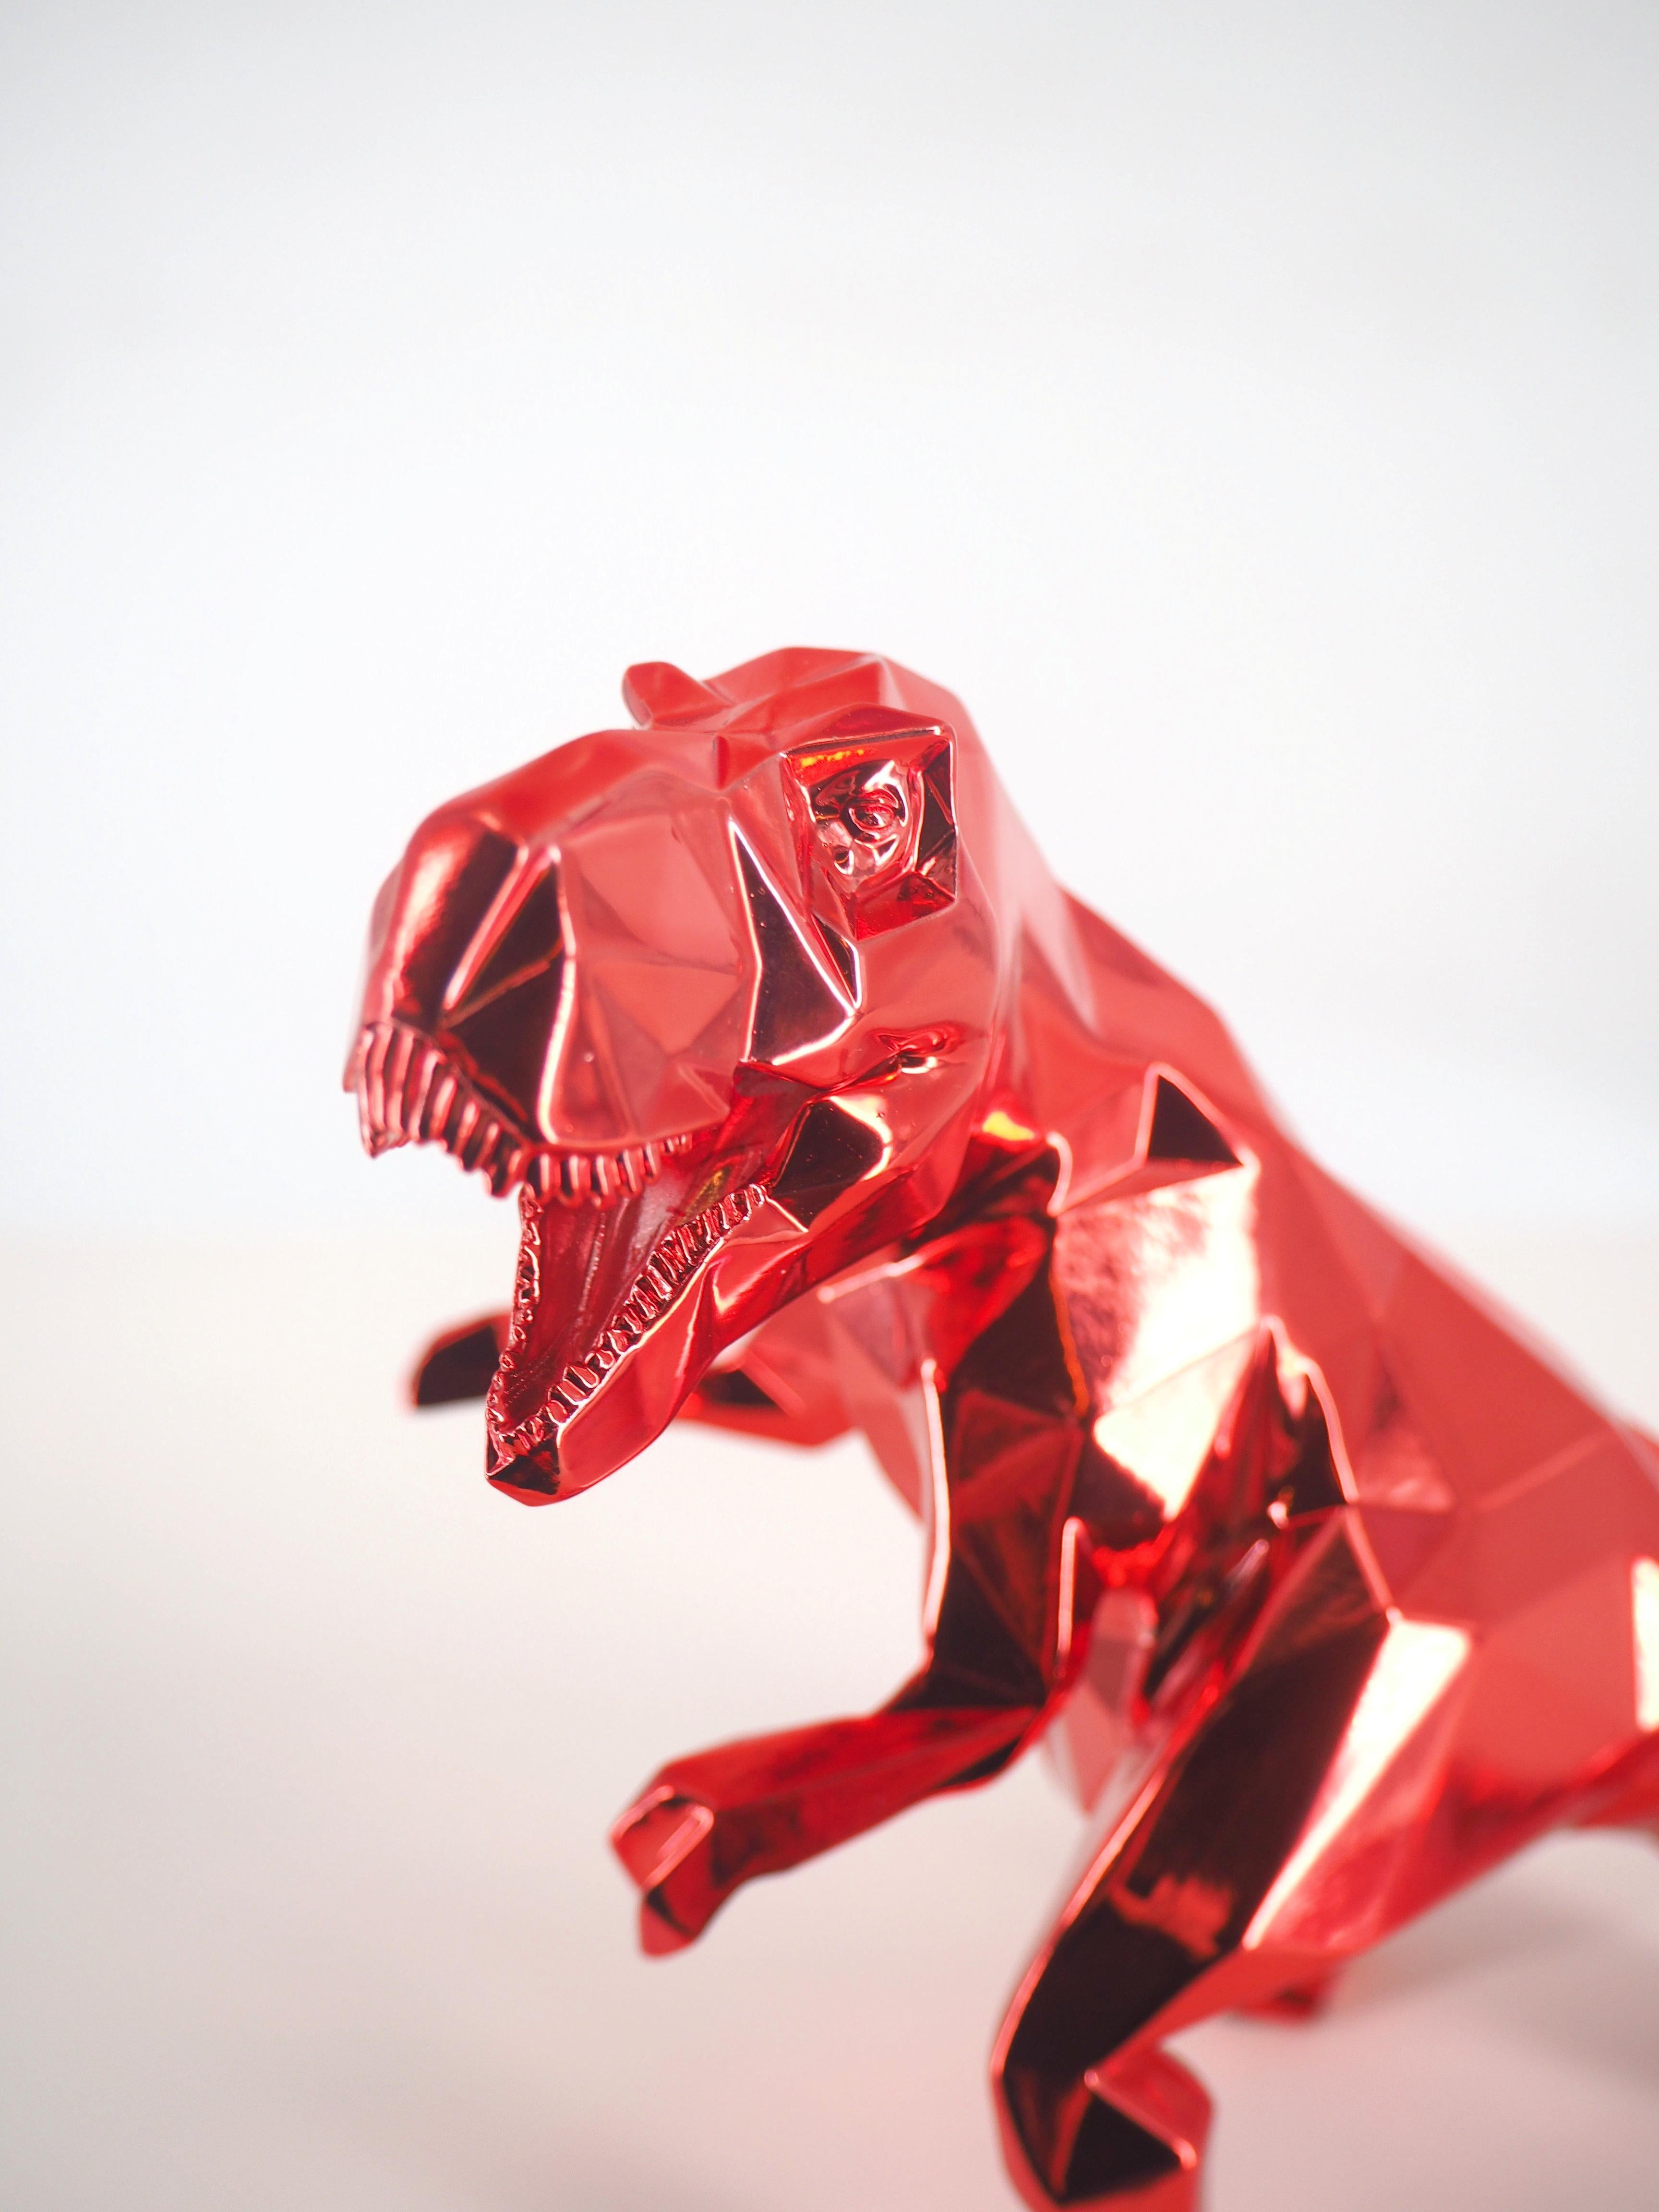 T-Rex (Red Edition) - Sculpture in original box with artist certificate For Sale 5